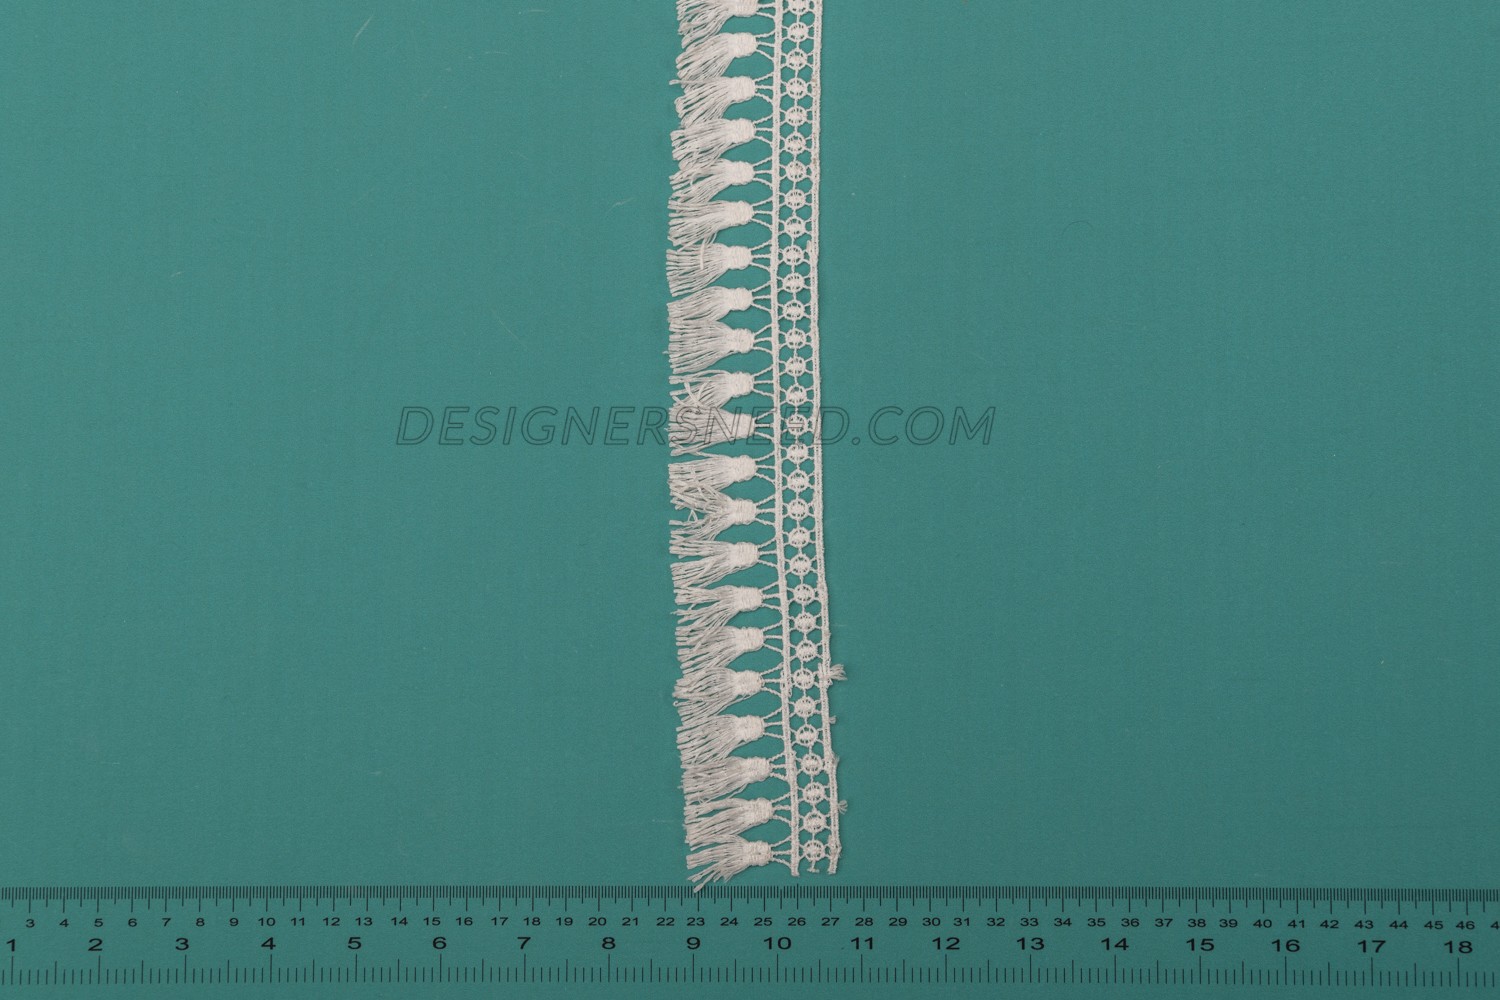 GPO Lace Polyester in White Color - Designers Need